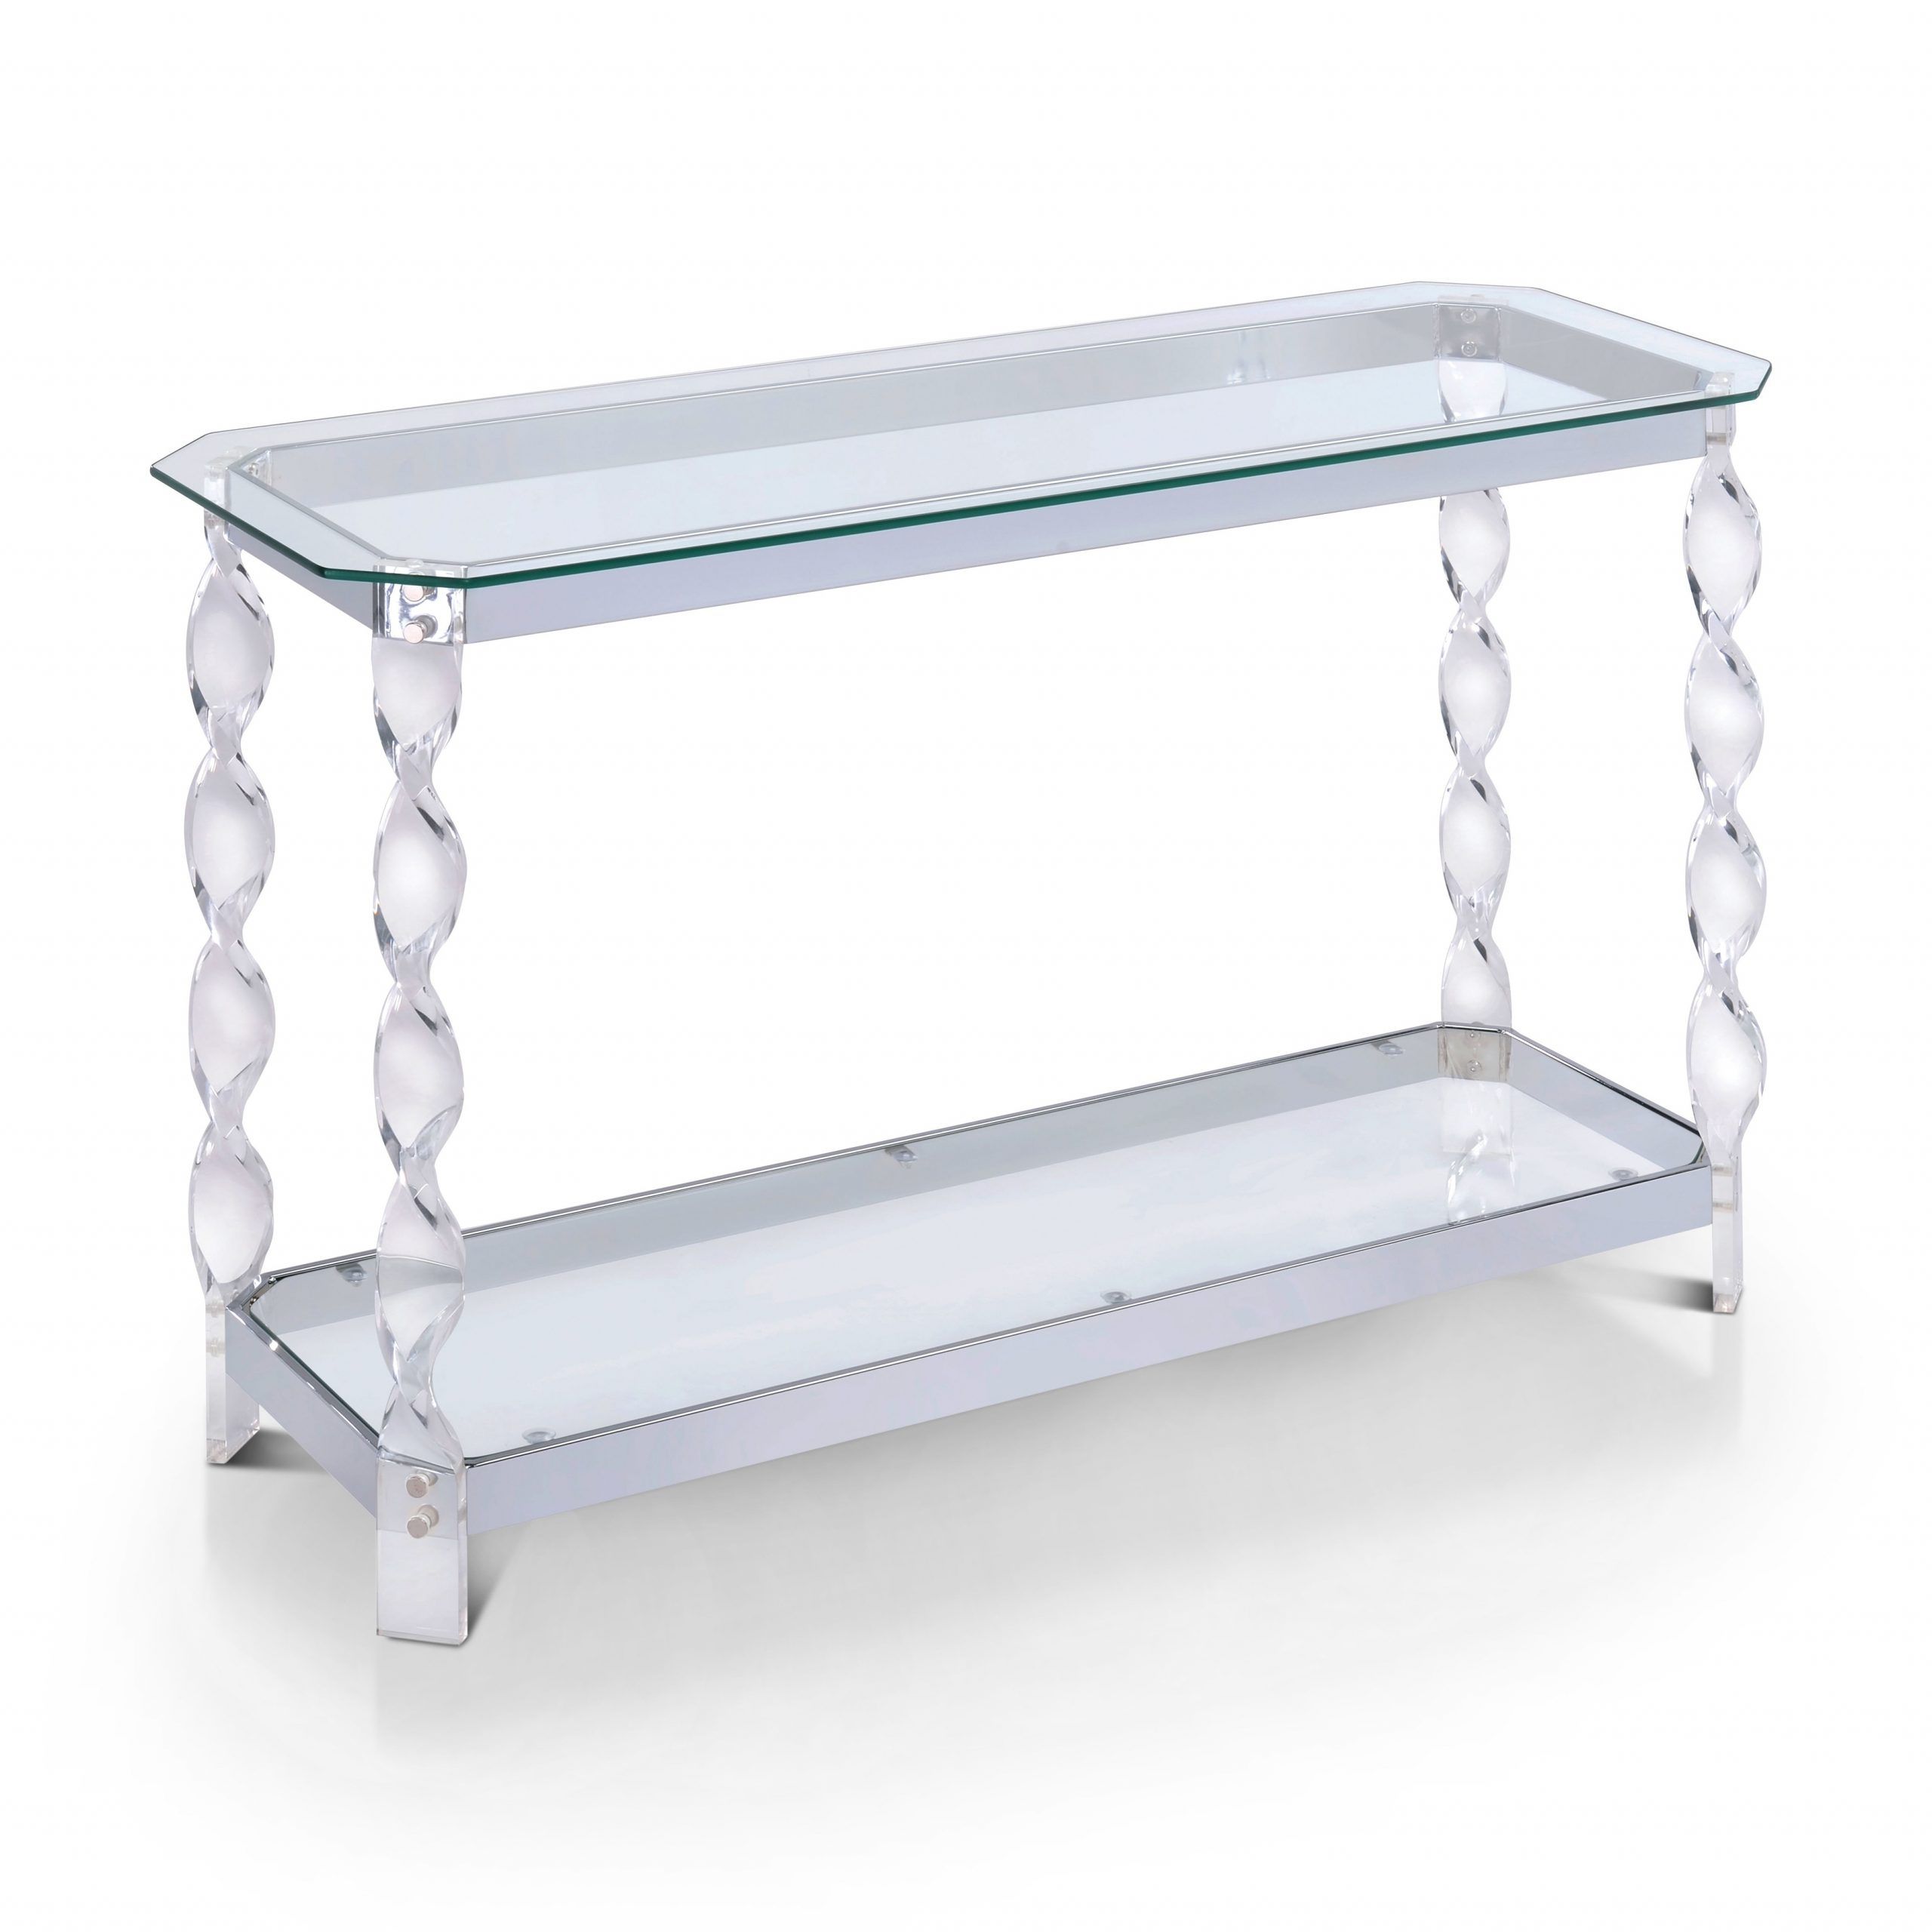 Console Tables For Entryway Chrome Sofa Table Clear Glass Inside Chrome And Glass Rectangular Console Tables (View 8 of 20)